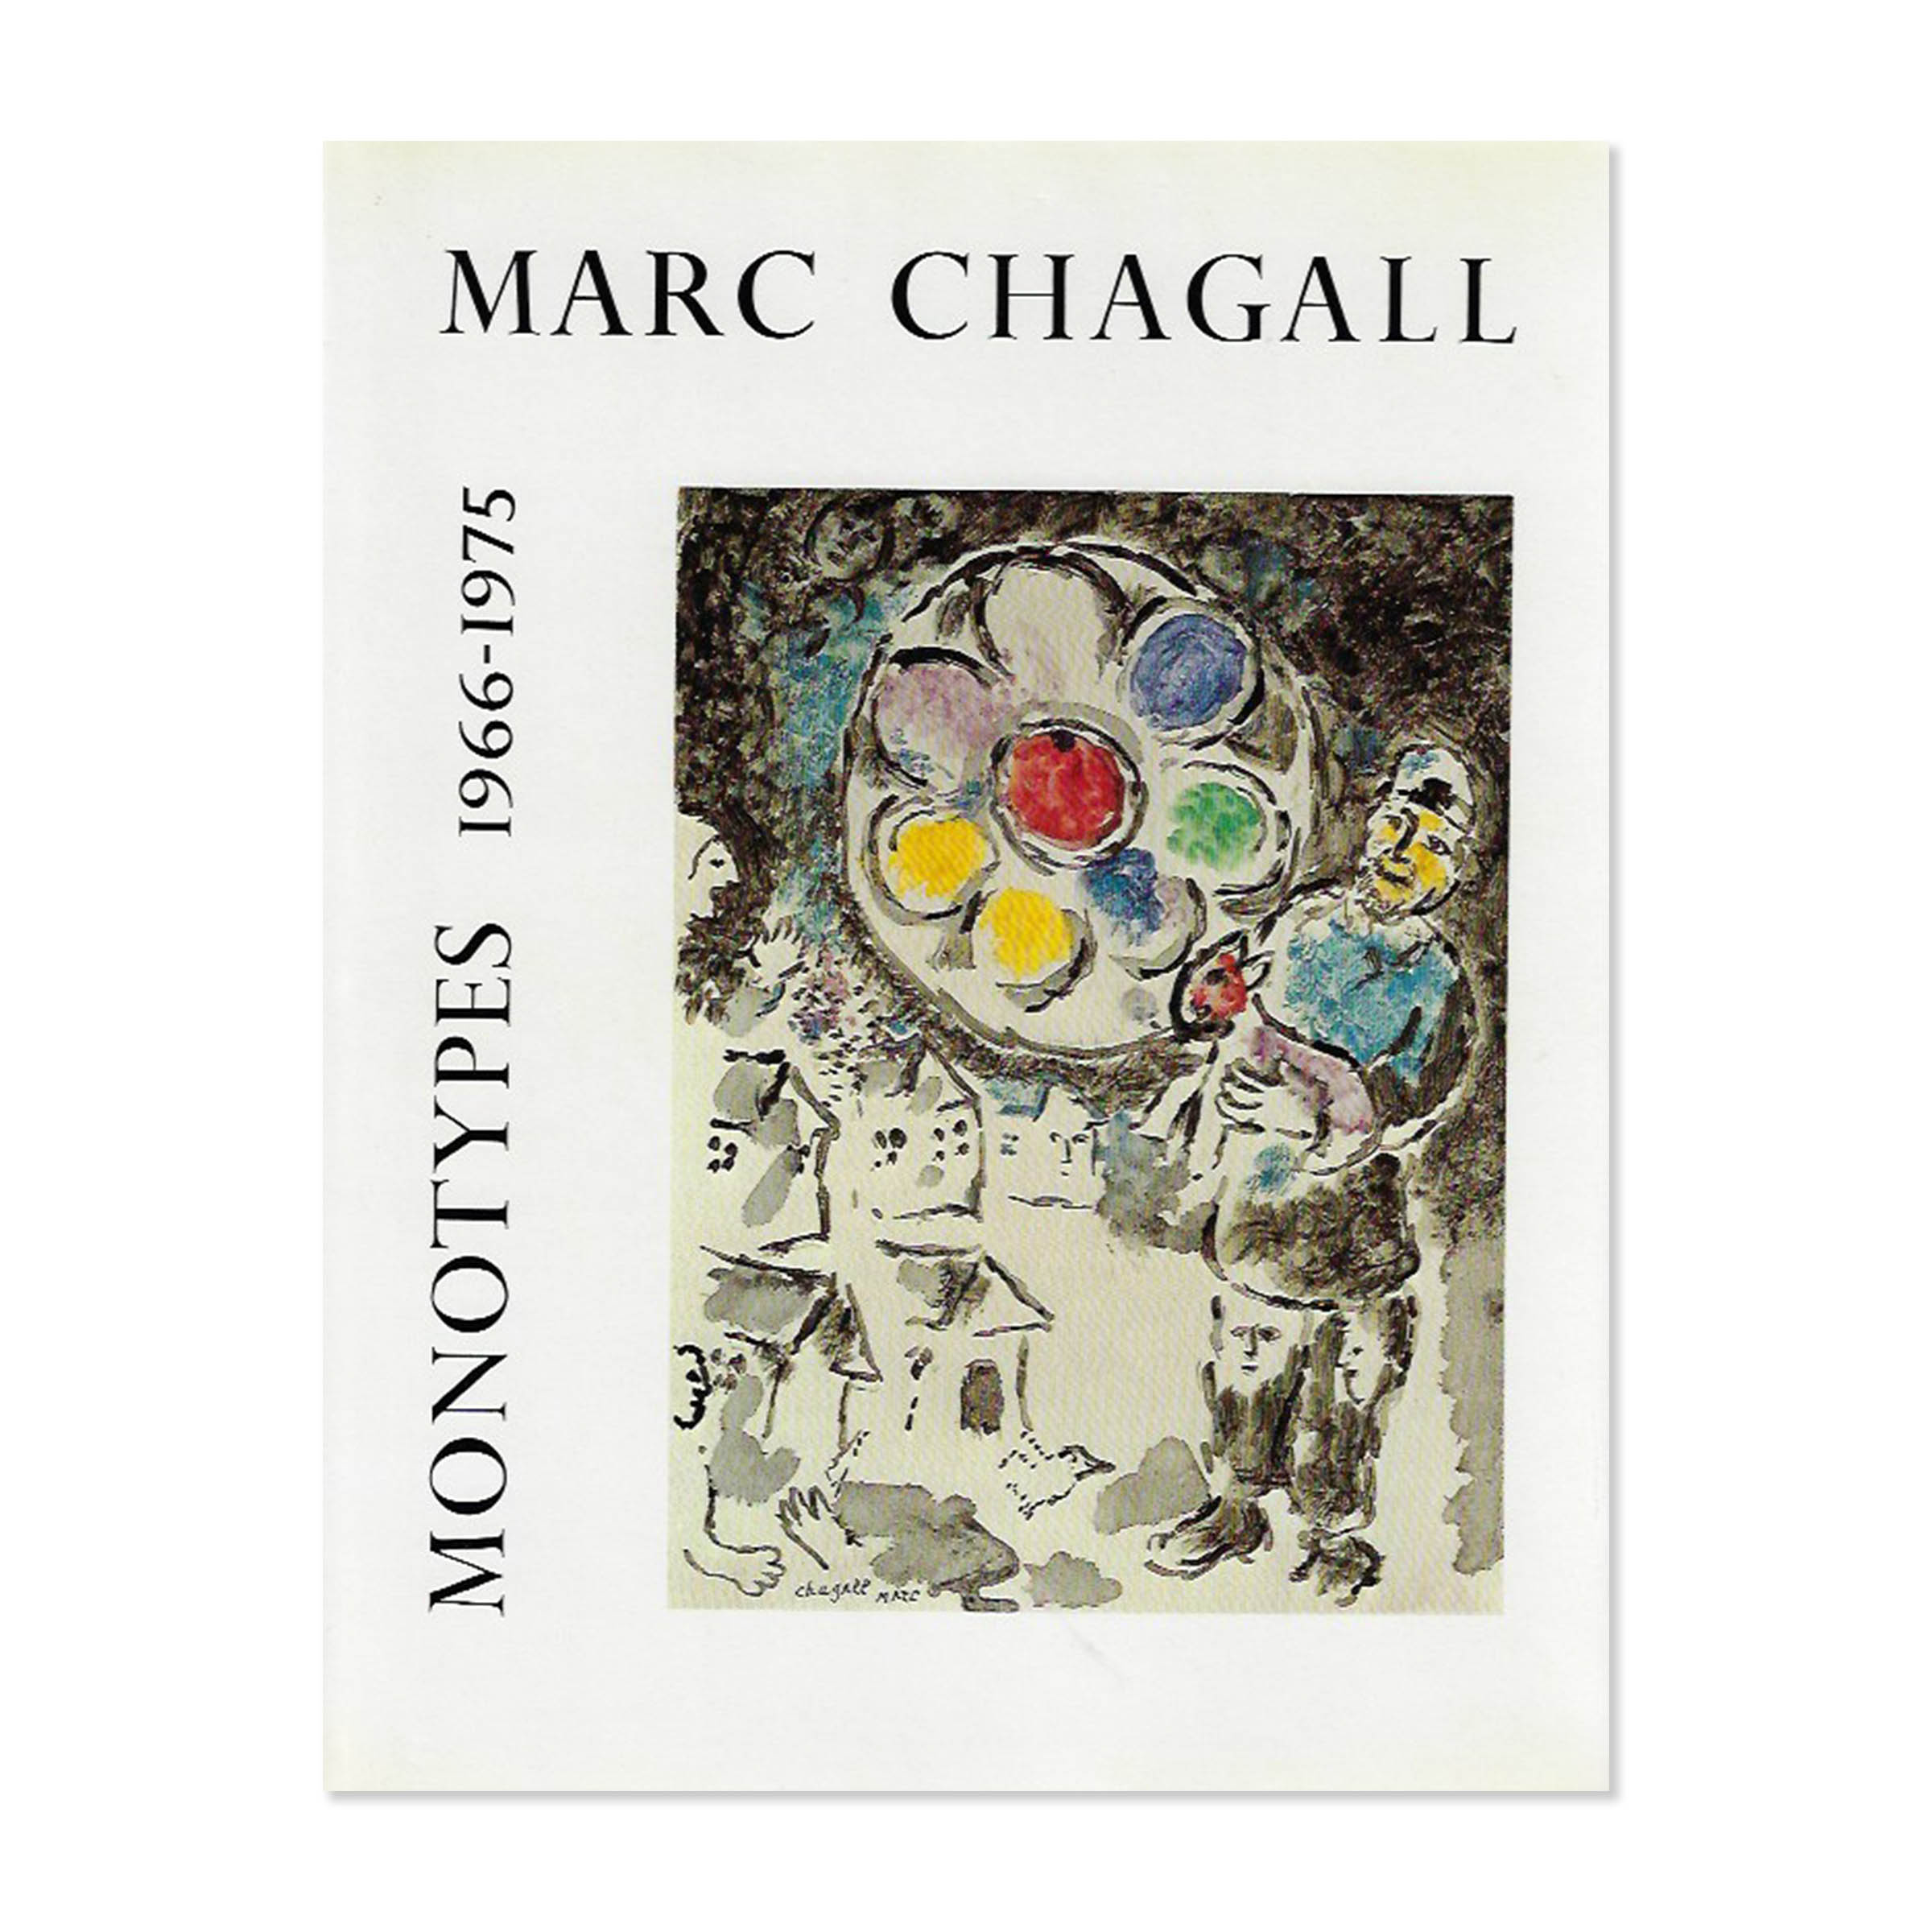 Chagall Monotypes 19§§-1975. Cover view